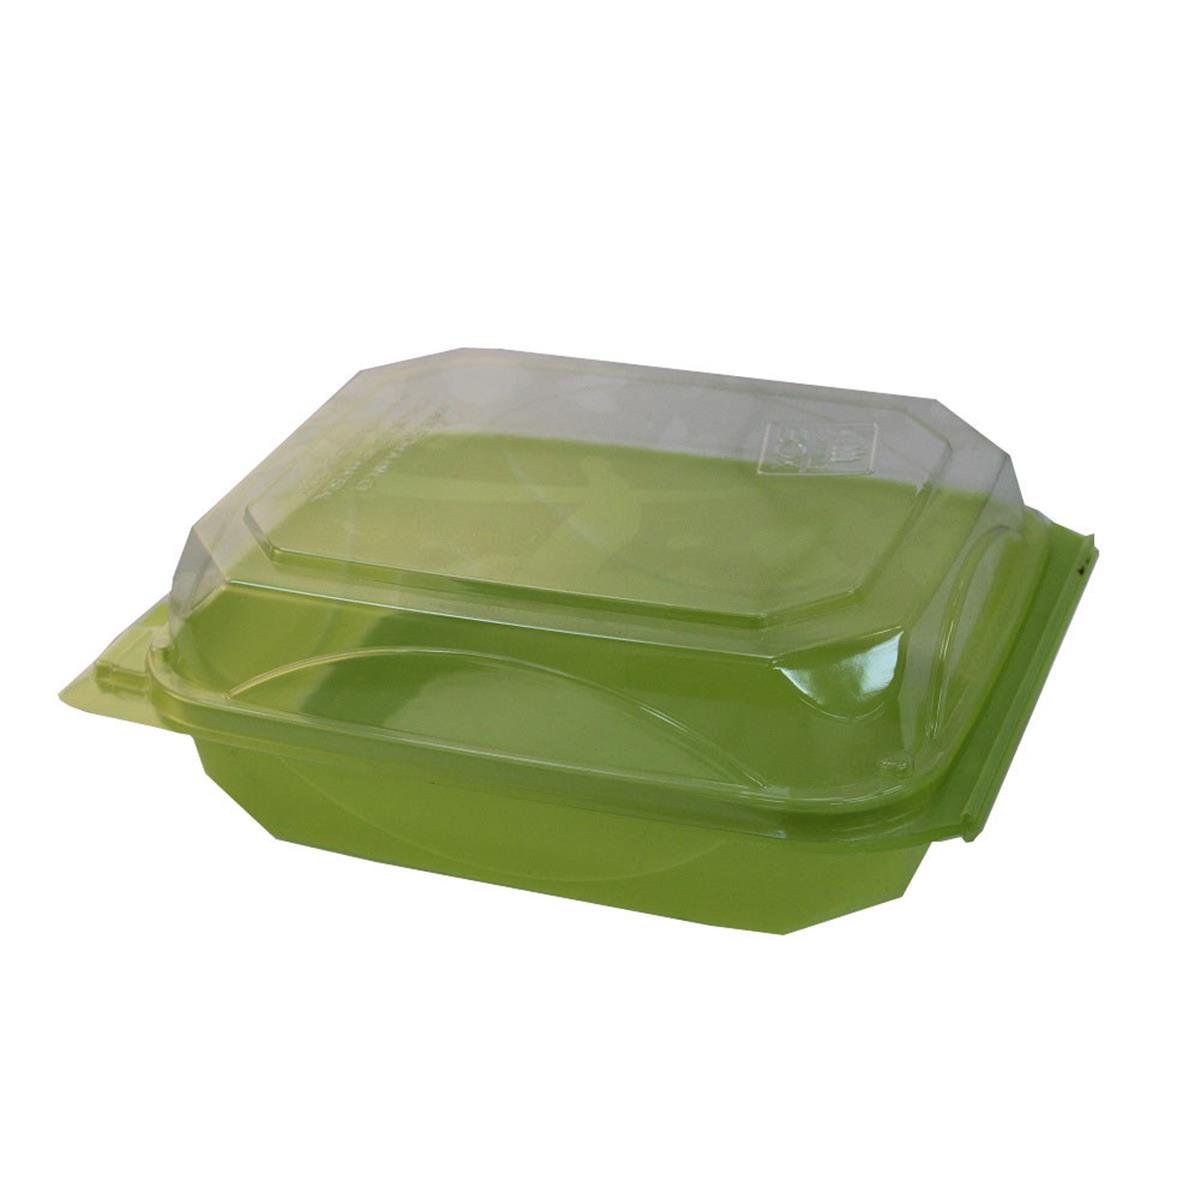 Cox-68-bb-lg Pe Hinged Container With Clear Lid, Lime Green - Case Of 250